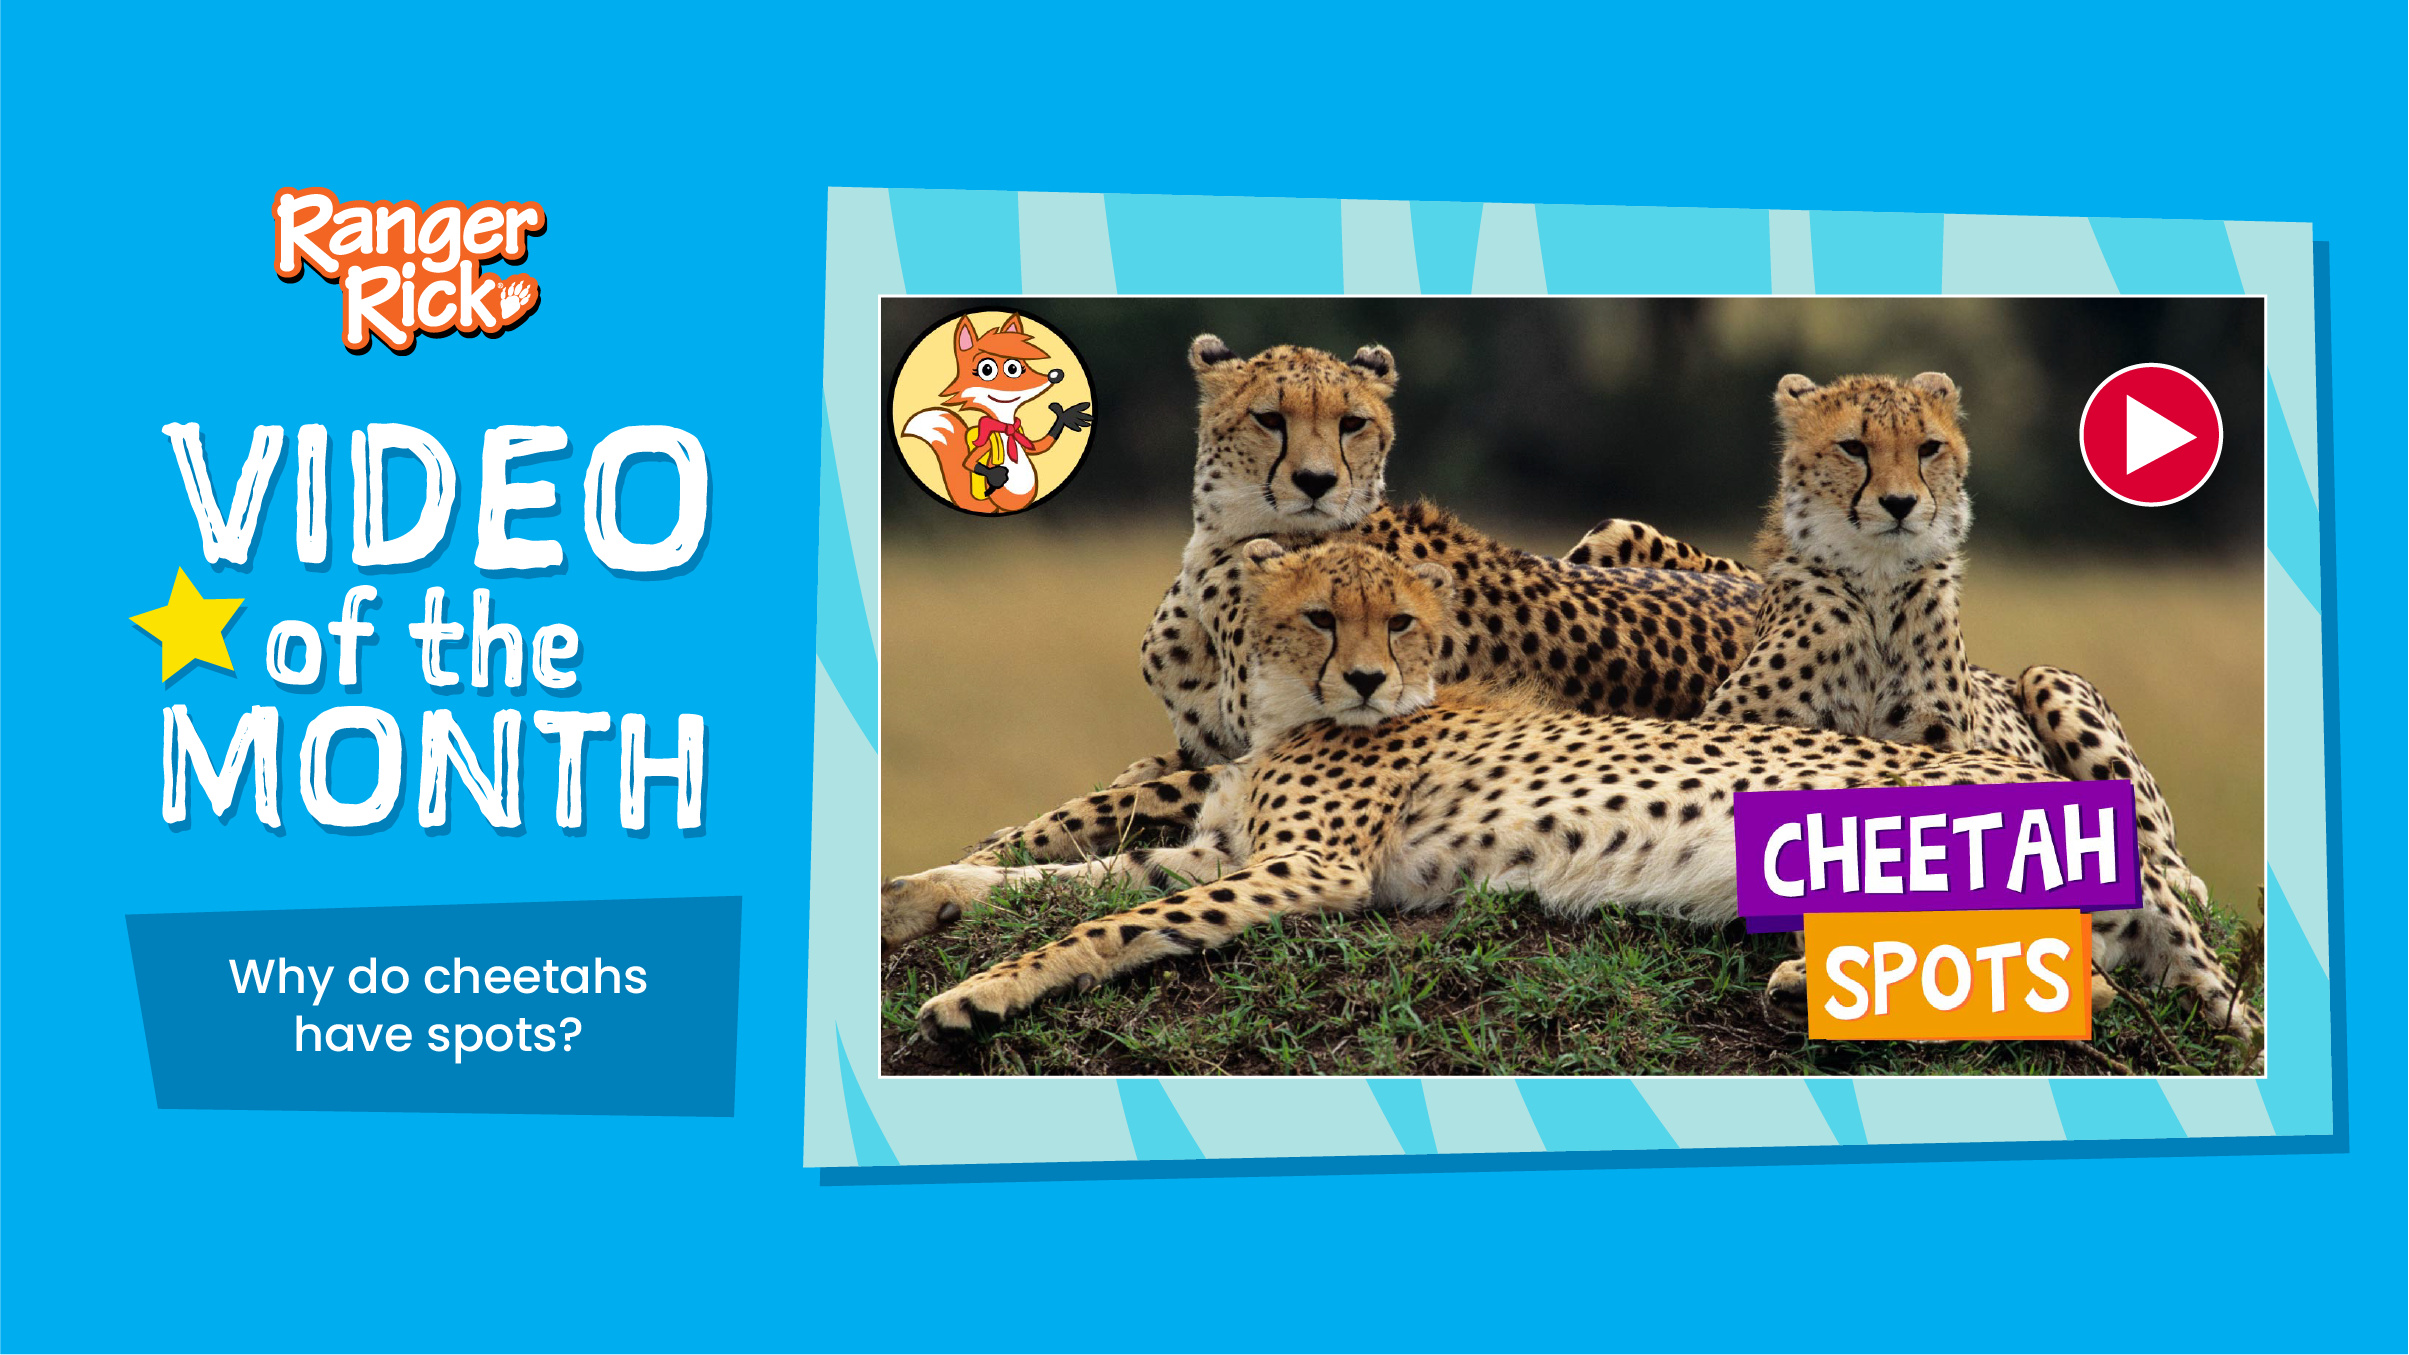 Video of the Month: Cheetah Spots